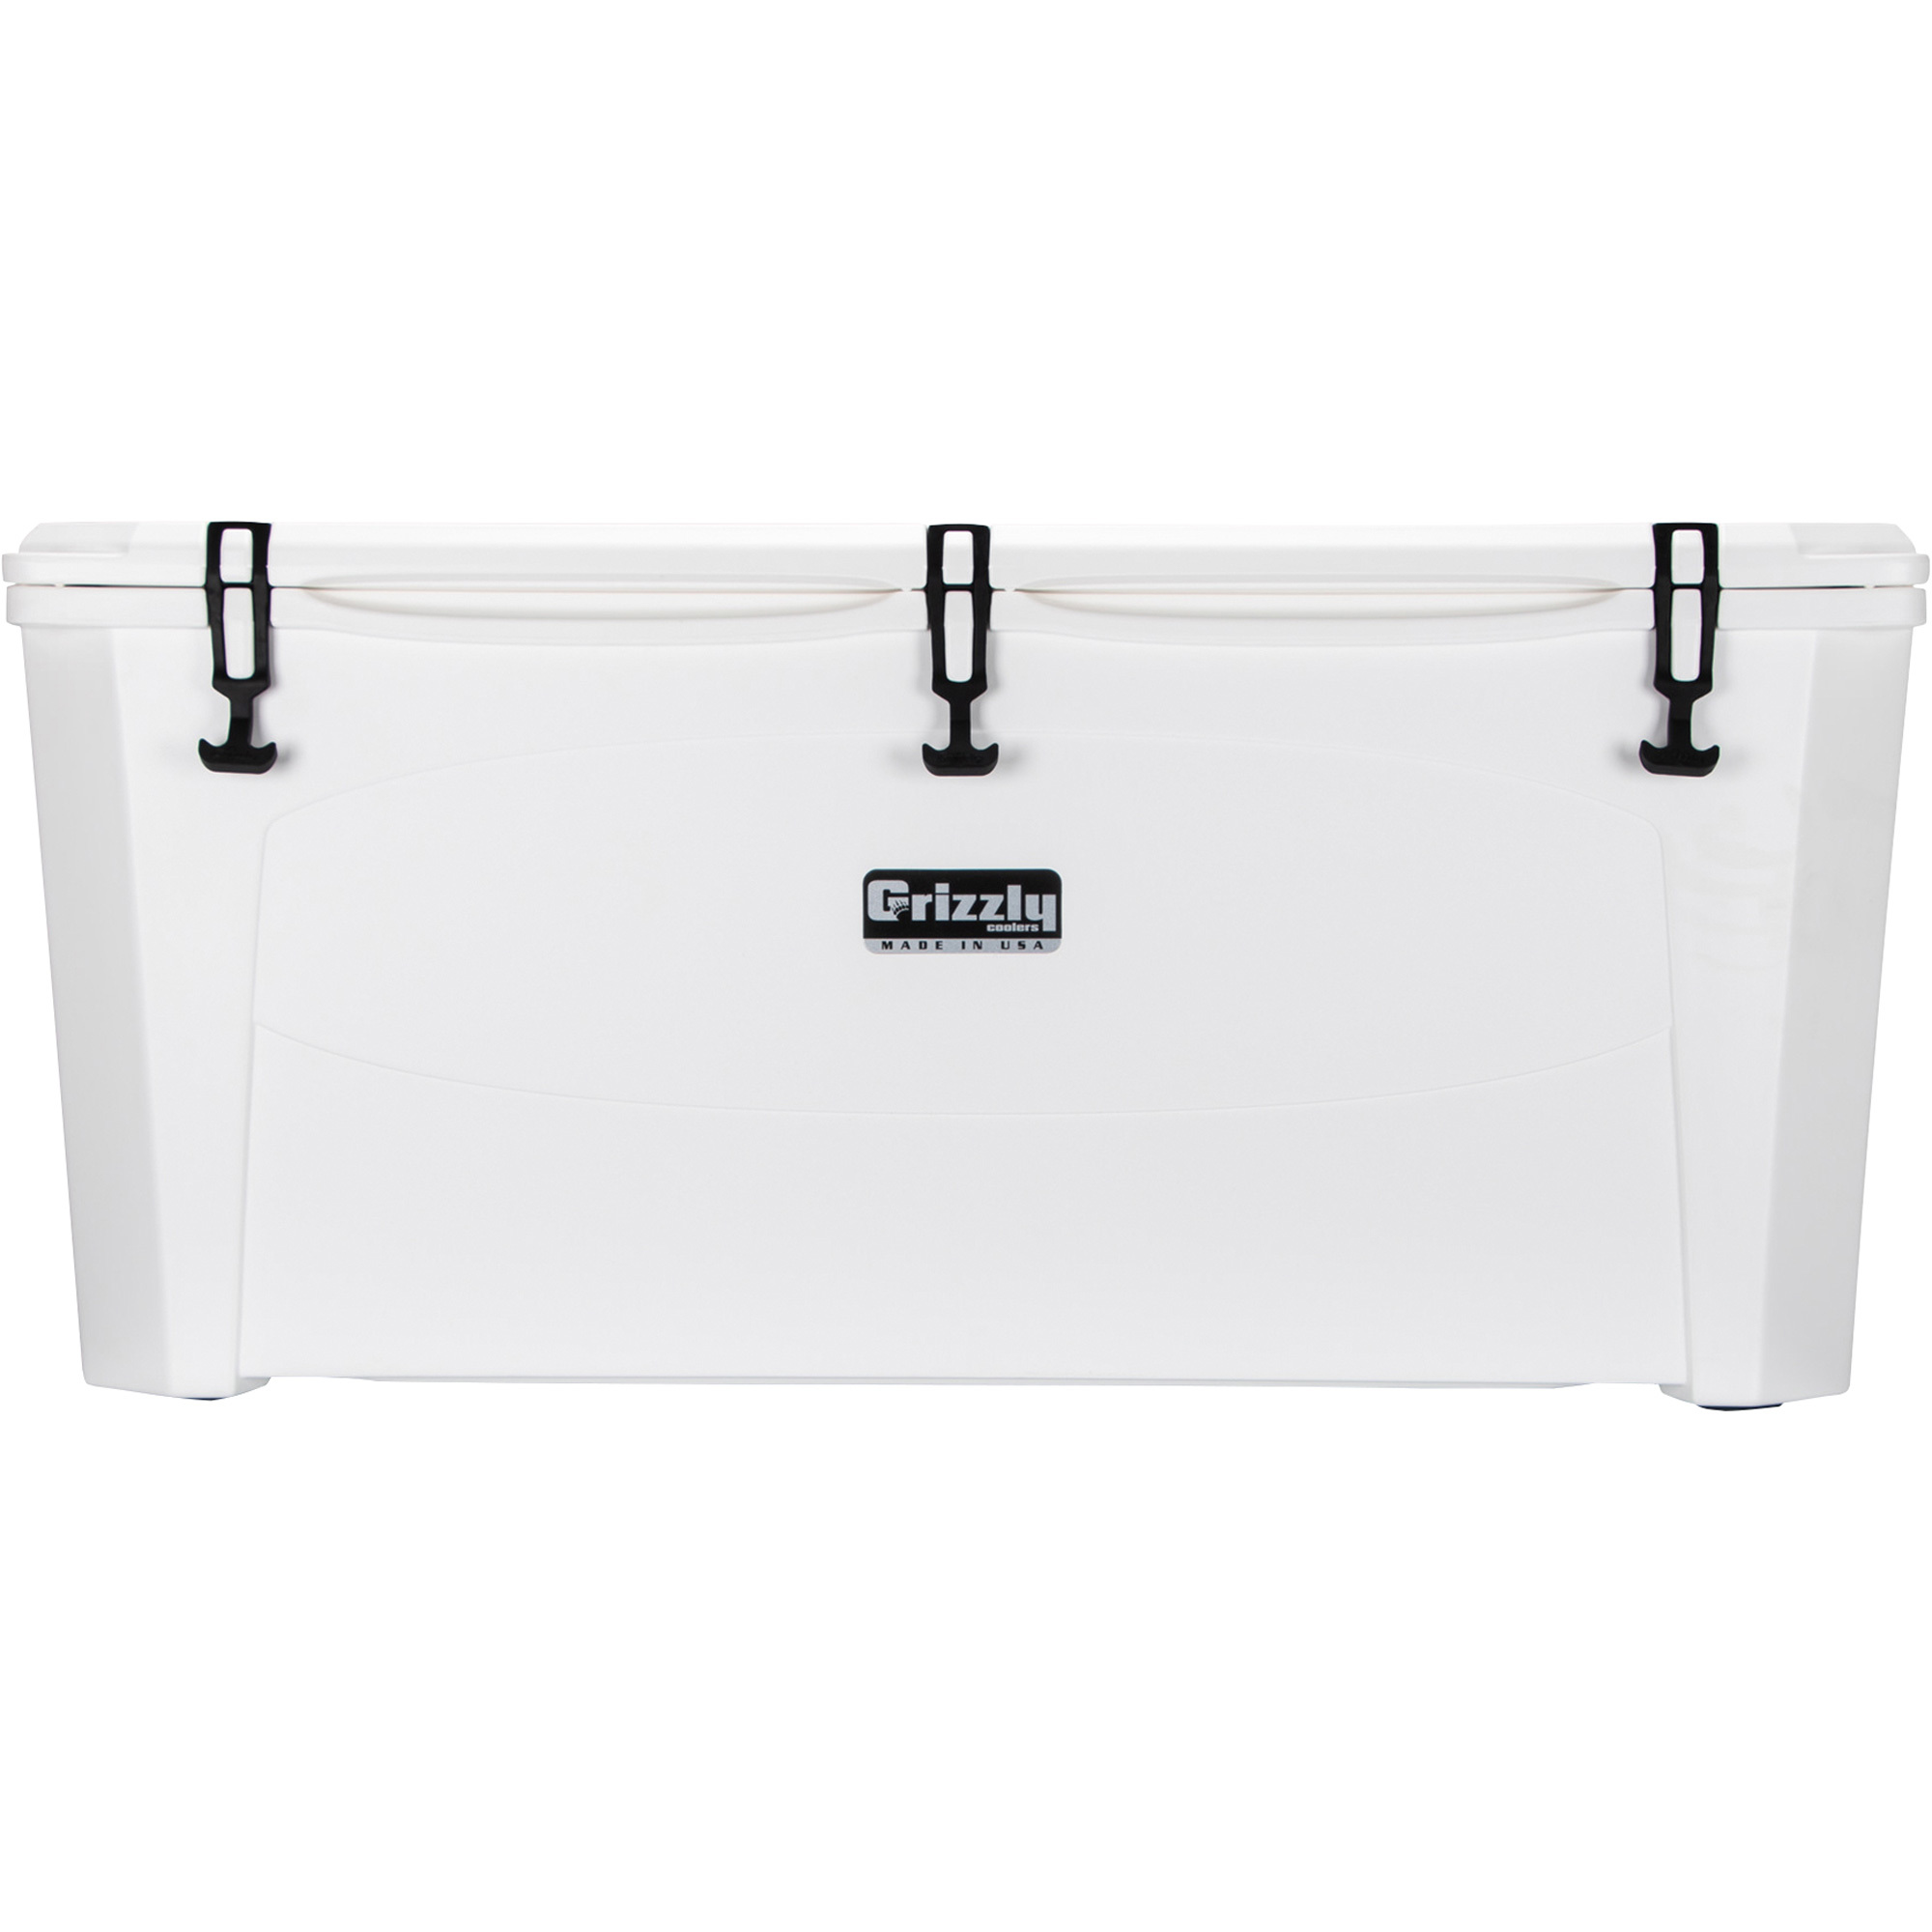 Grizzly Cooler 165-qt. White, Model G165 -  Grizzly Coolers, 400799